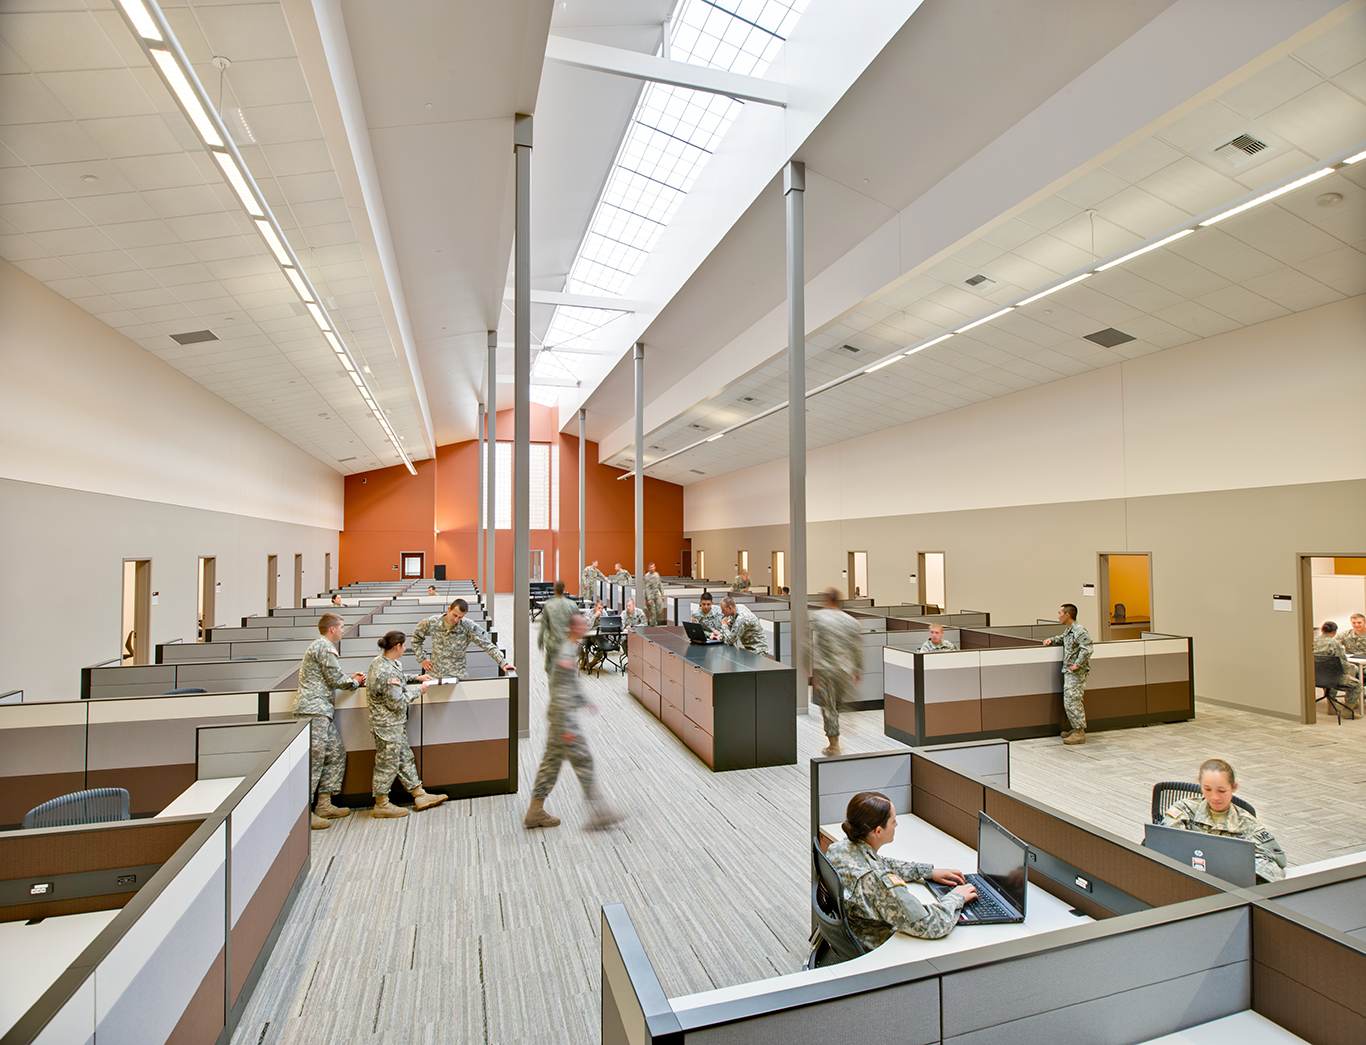 Daylighting helps the military fulfill their demanding roles.